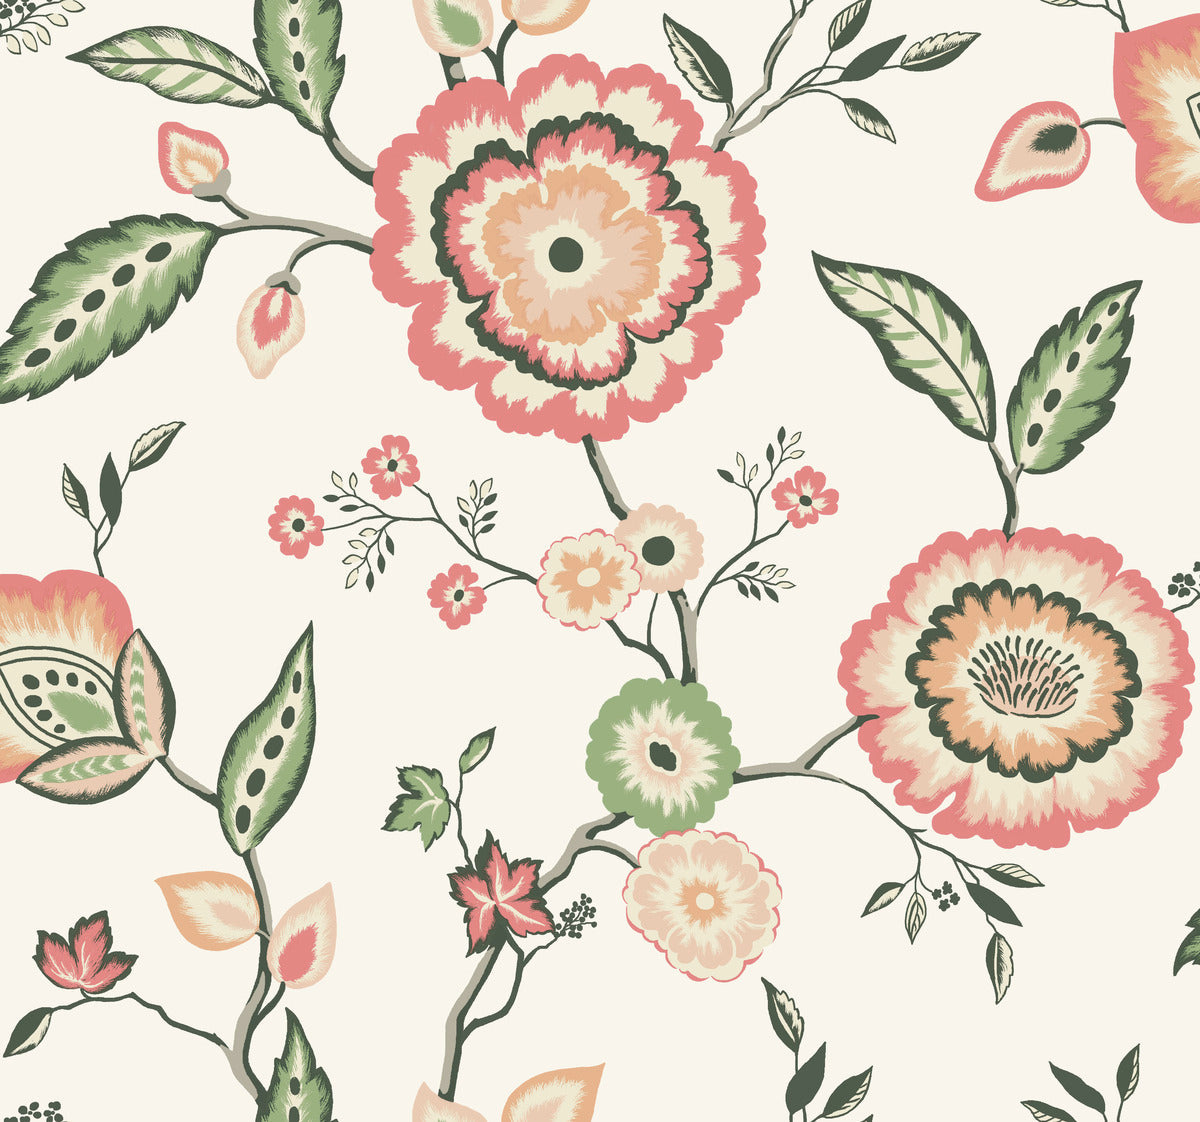 A seamless floral pattern featuring large pink and cream flowers with green accents. The design includes various leaves and small blossoms scattered on a light beige background, giving the pattern a vintage, delicate aesthetic. Enjoy botanical elegance with York Wallcoverings Dahlia Blooms Midnight/Multi Wallpaper Black, Pink (60 Sq.Ft.) for easy installation and removal.